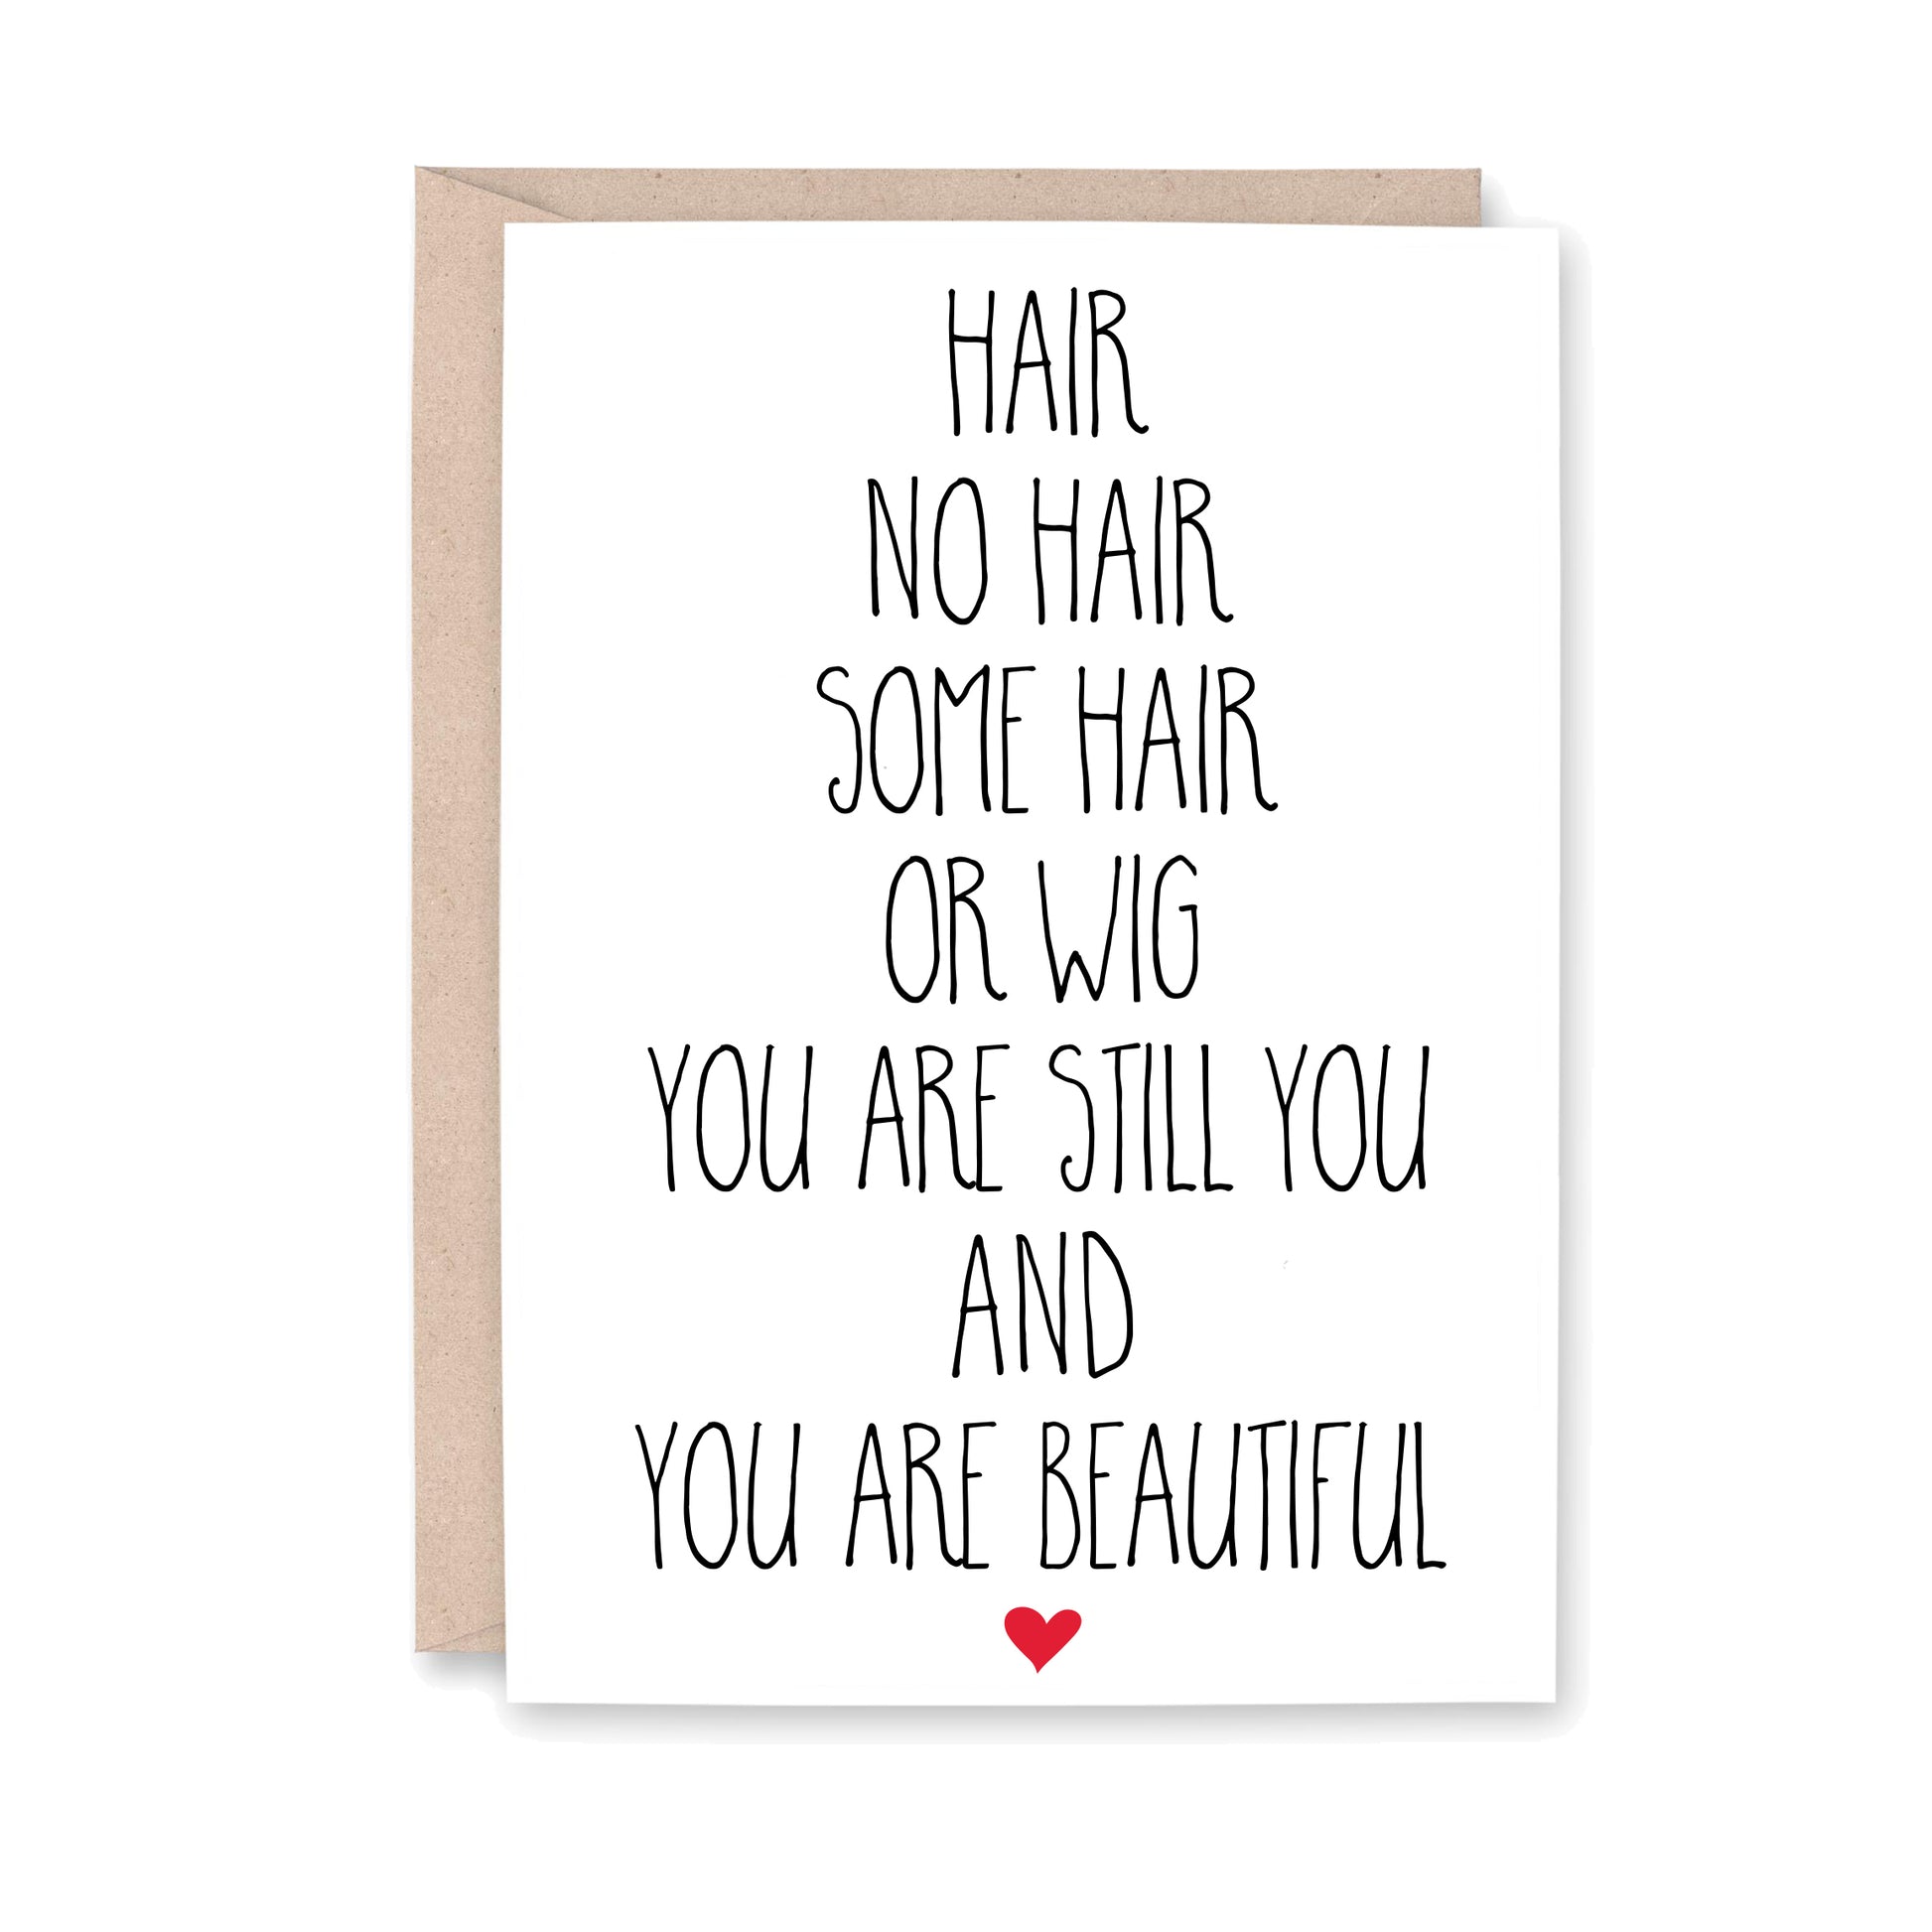 greeting card with a small red heart at the bottom that says, "Hair no hair some hair or wig, you are still you and you are beautiful"